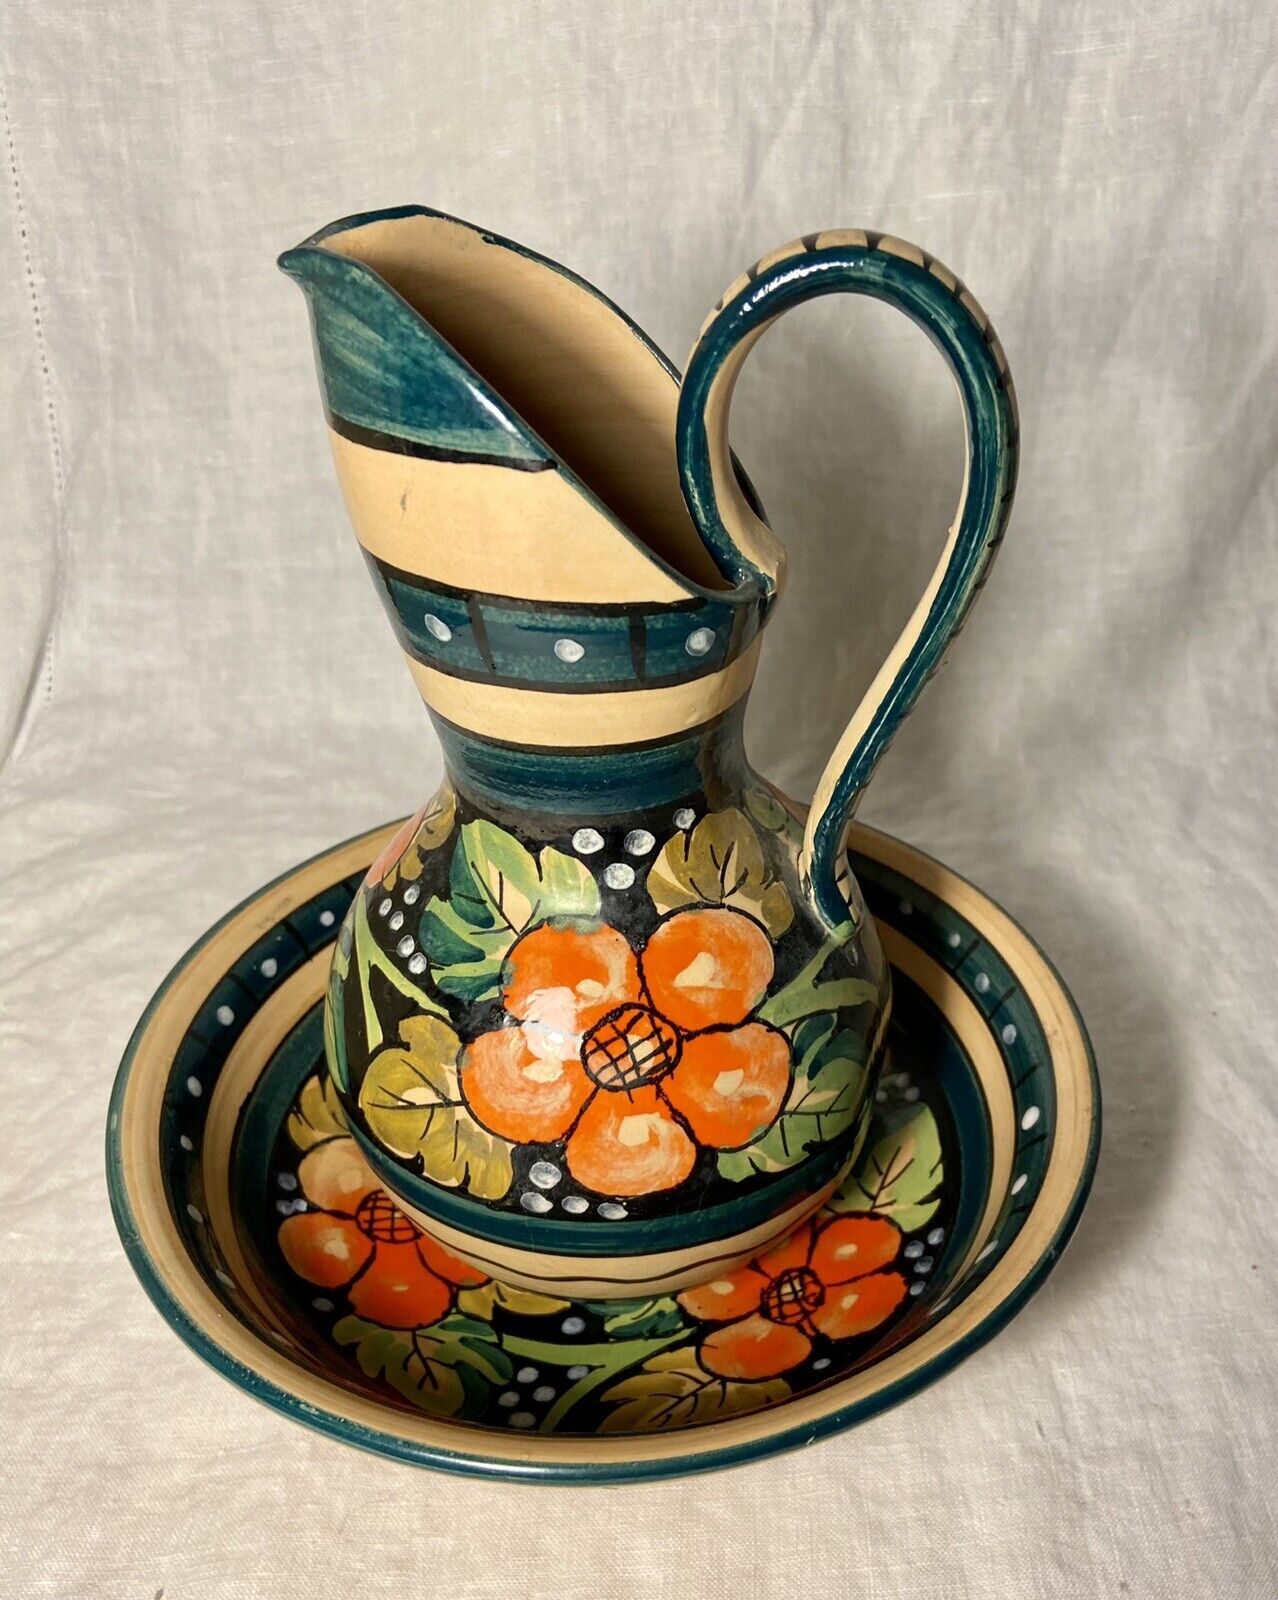 Vtg Italian Pottery Pitcher & Bowl Set 1988 Hand Made & Painted Floral Design 8”